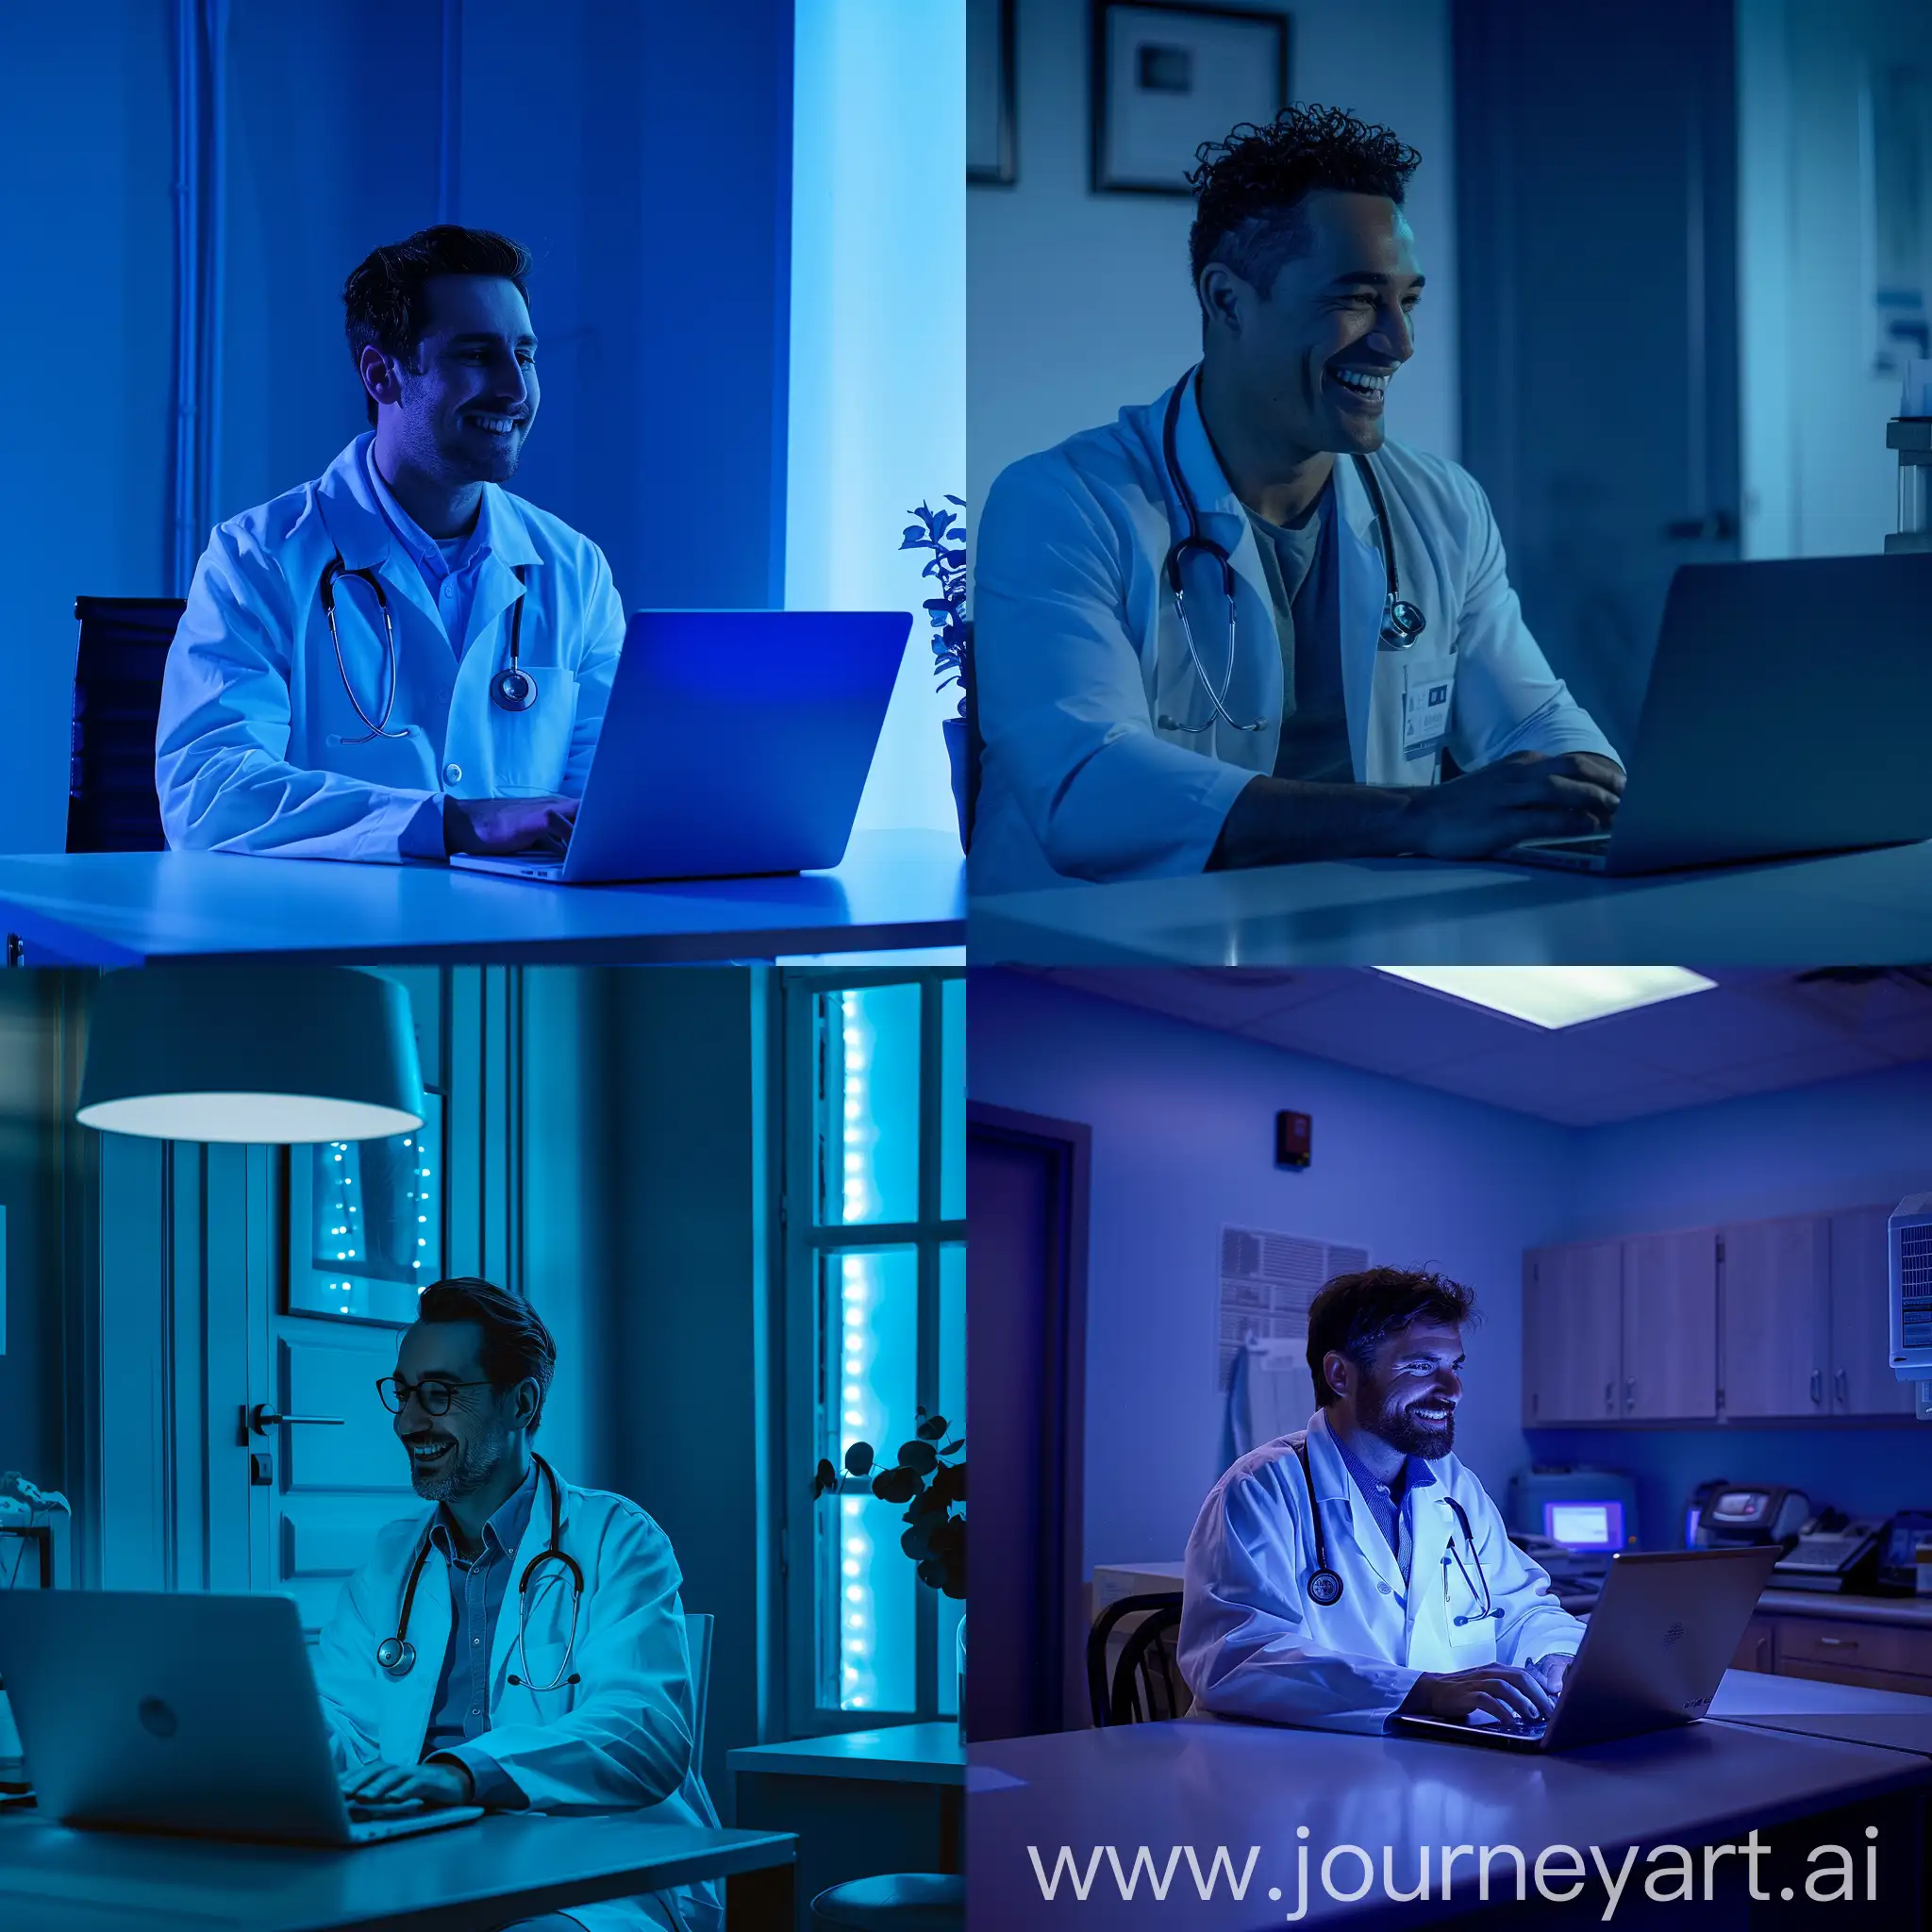 Smiling-Doctor-in-White-Coat-with-Laptop-in-BlueTinted-Room